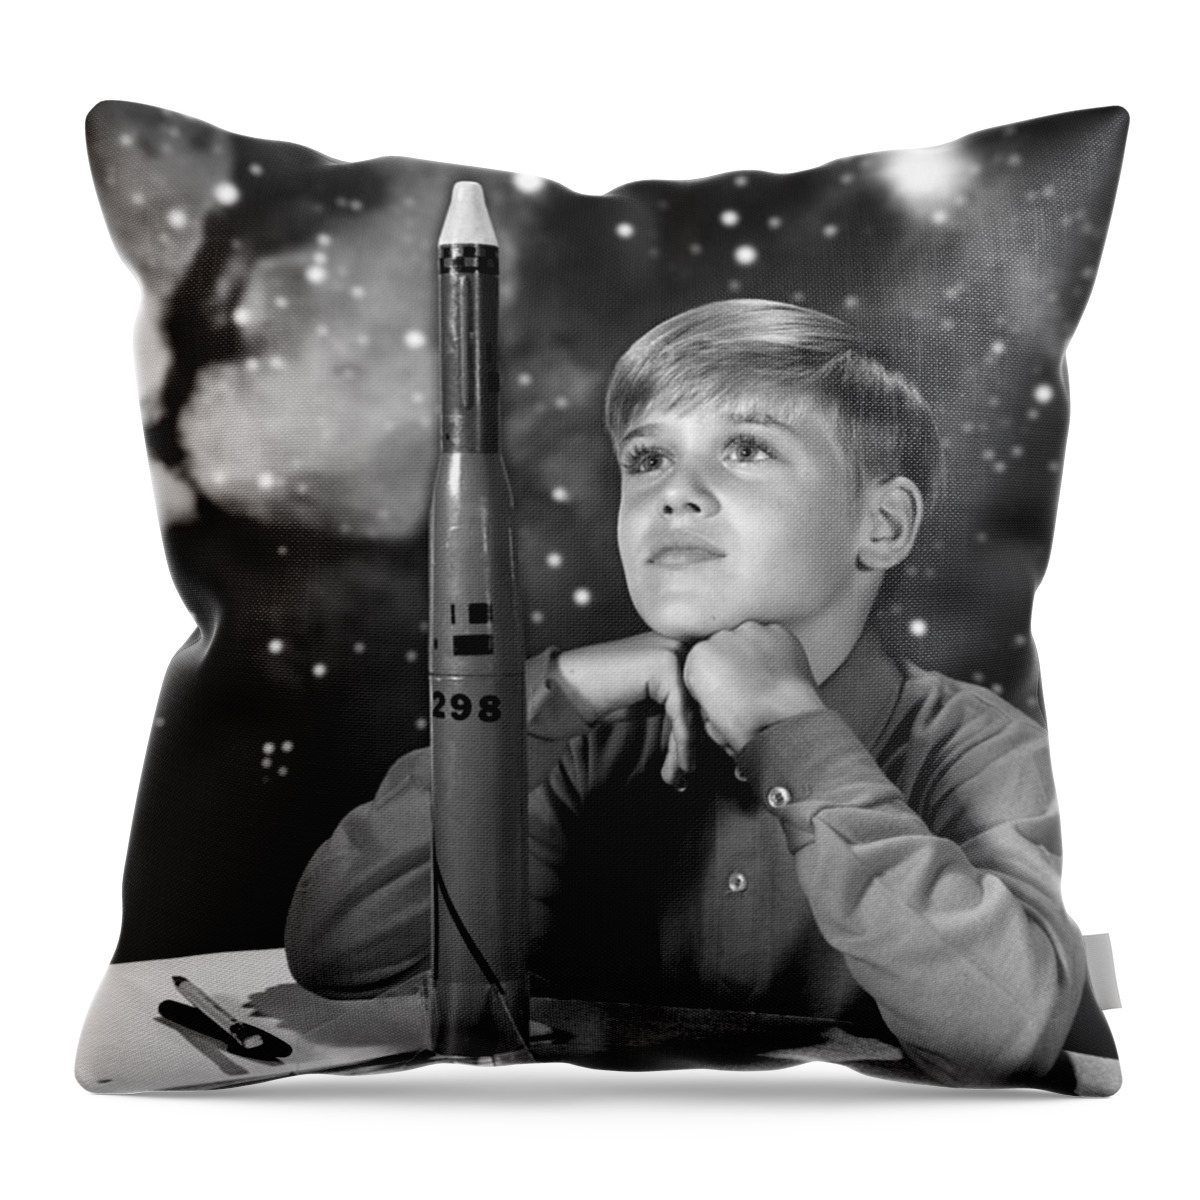 1950s Throw Pillow featuring the photograph Boy With Model Rocket, C.1960s by H Armstrong Roberts ClassicStock